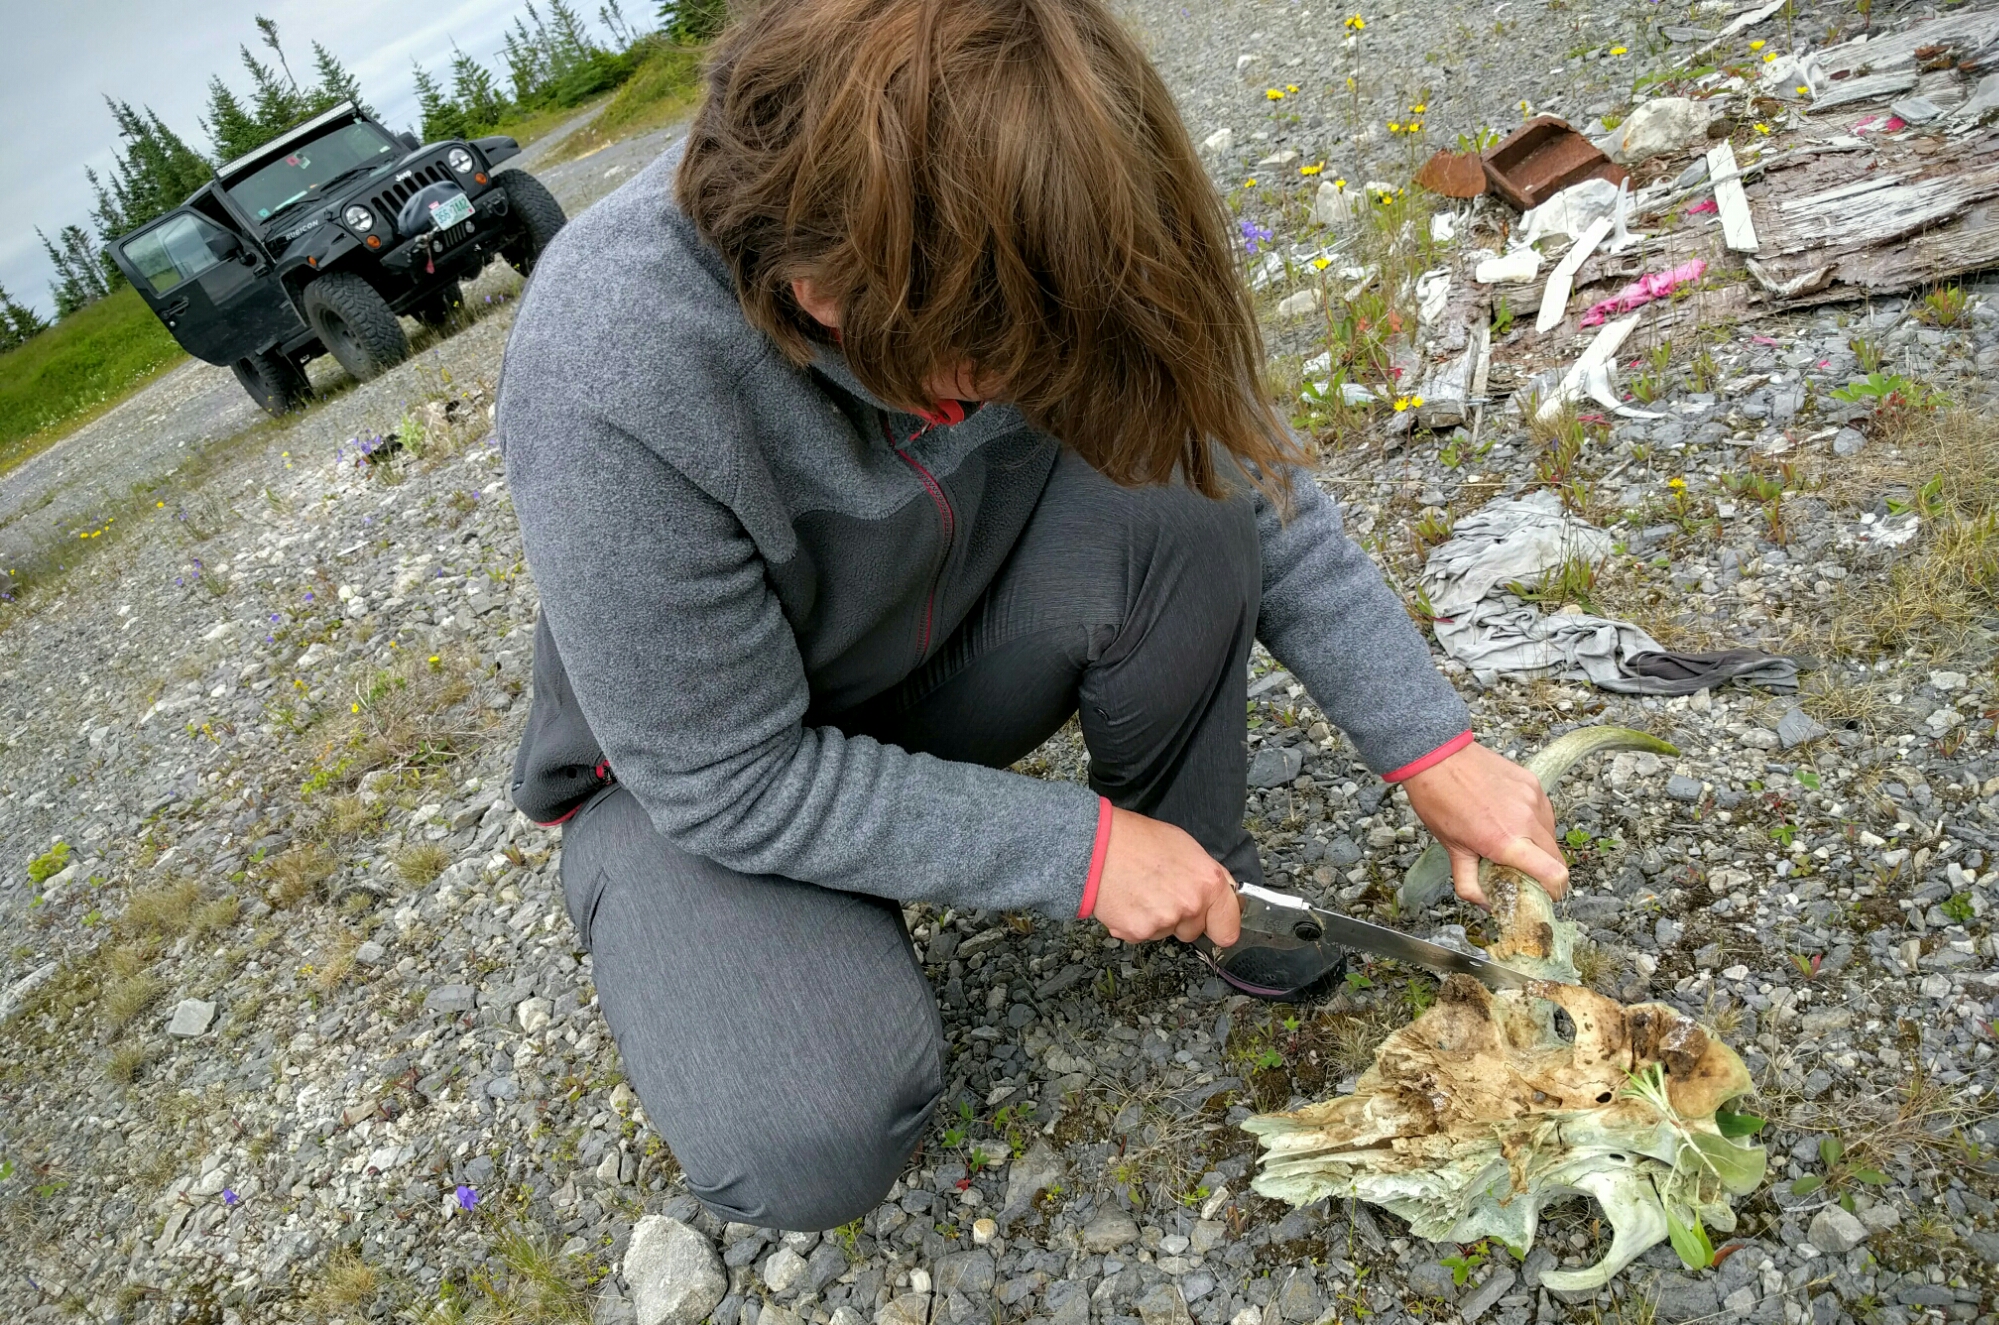 Alison collects an antler.